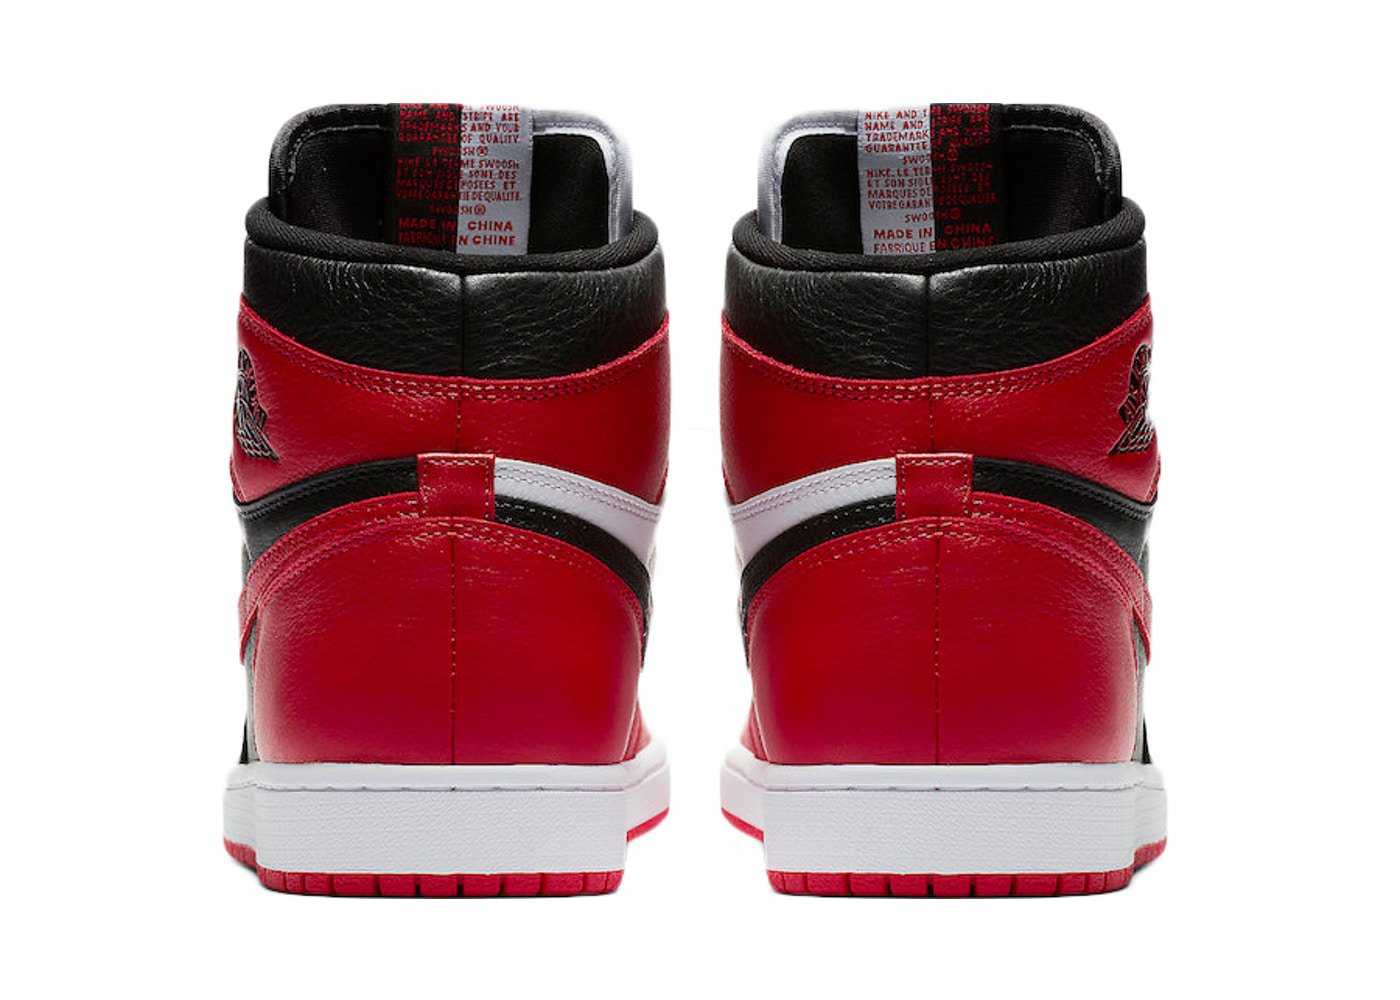 Heskicks on Twitter: "So what is the difference between these Homage to Home Jordan 1s 11 was numbered, and had some words on back tab? look identical tho? im so